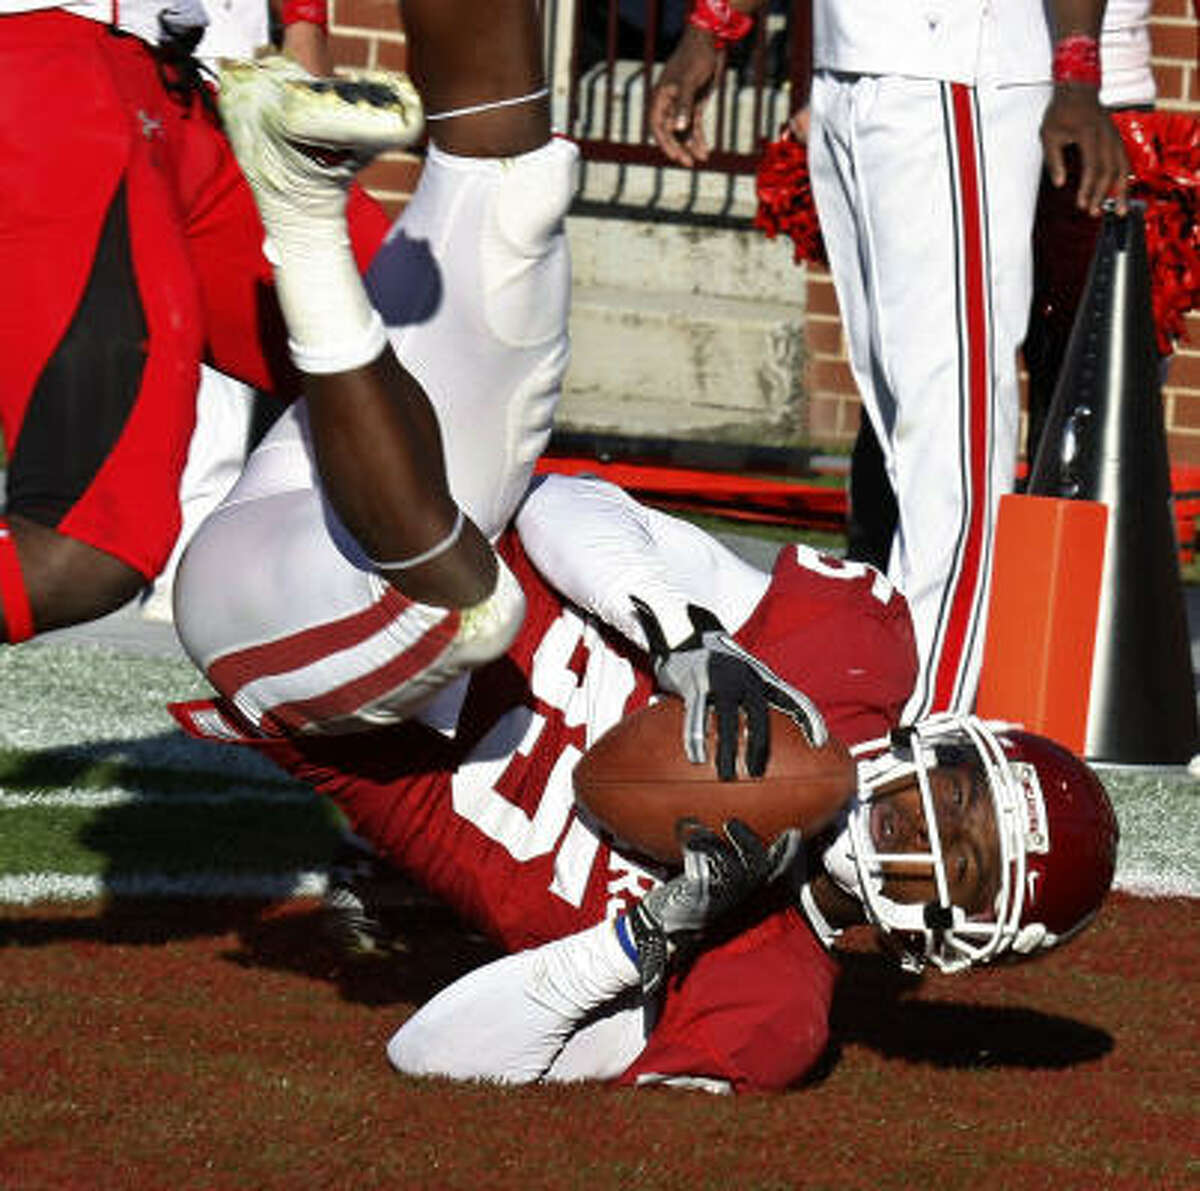 Oklahoma wide receiver Ryan Broyles falls backwards into the end zone with a touchdown against Texas Tech in the second quarter on Saturday.